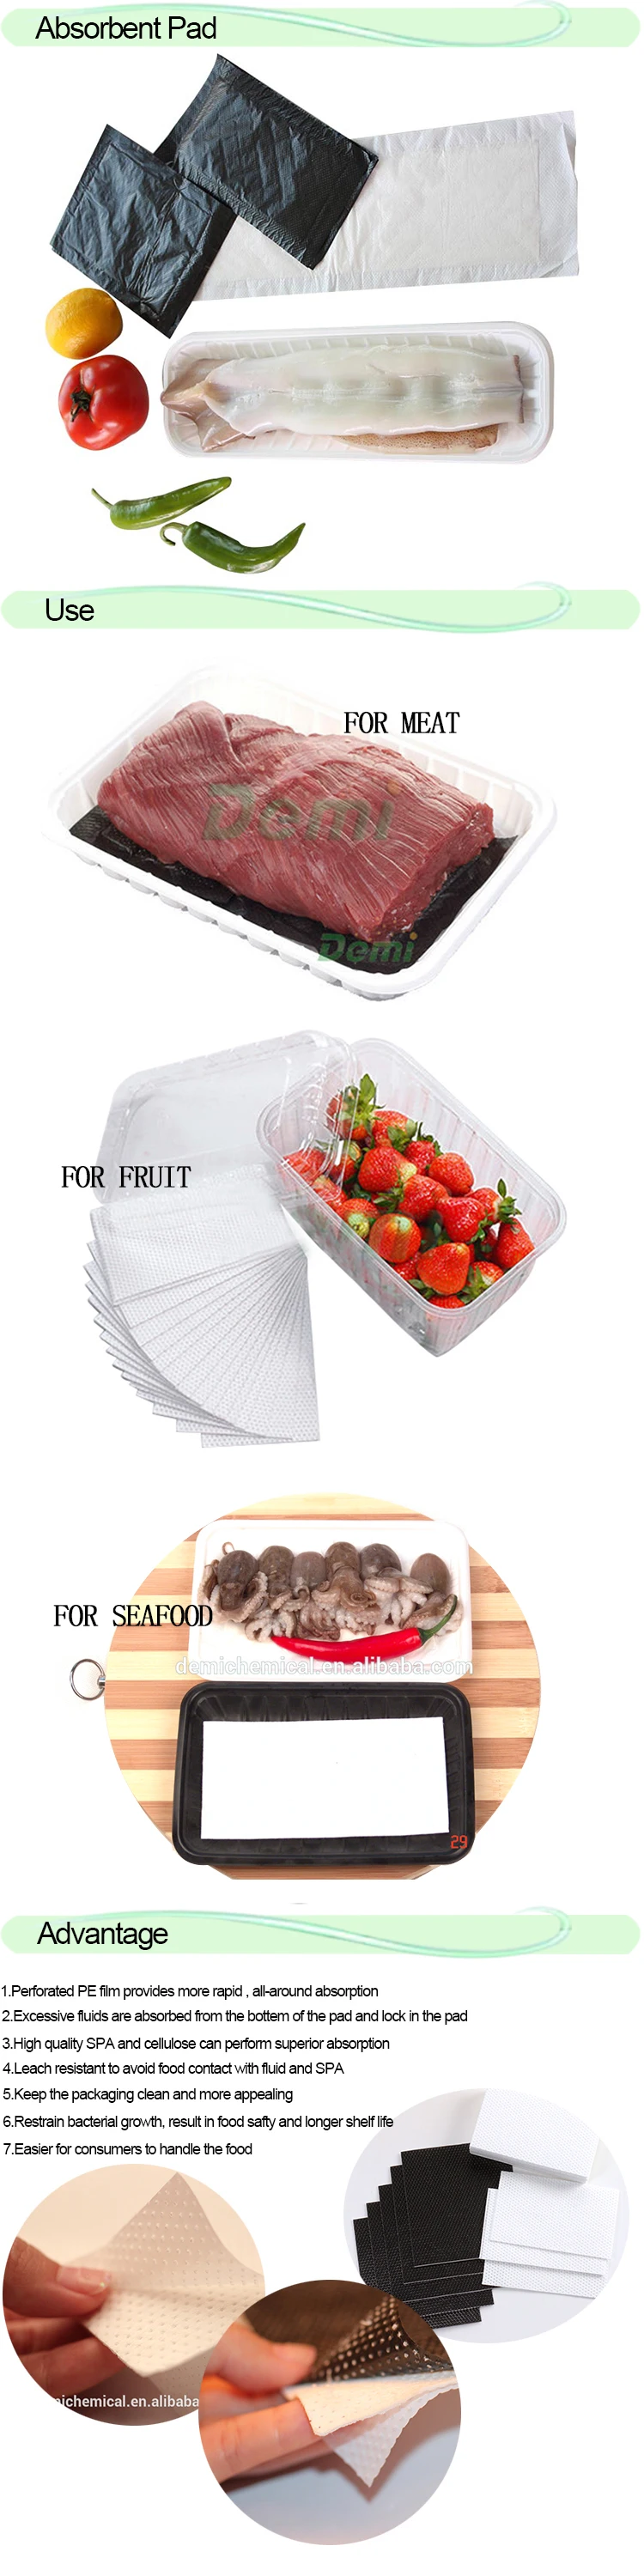 Convenient Kitchen Blood Water Absorbent Food Pad For Meat